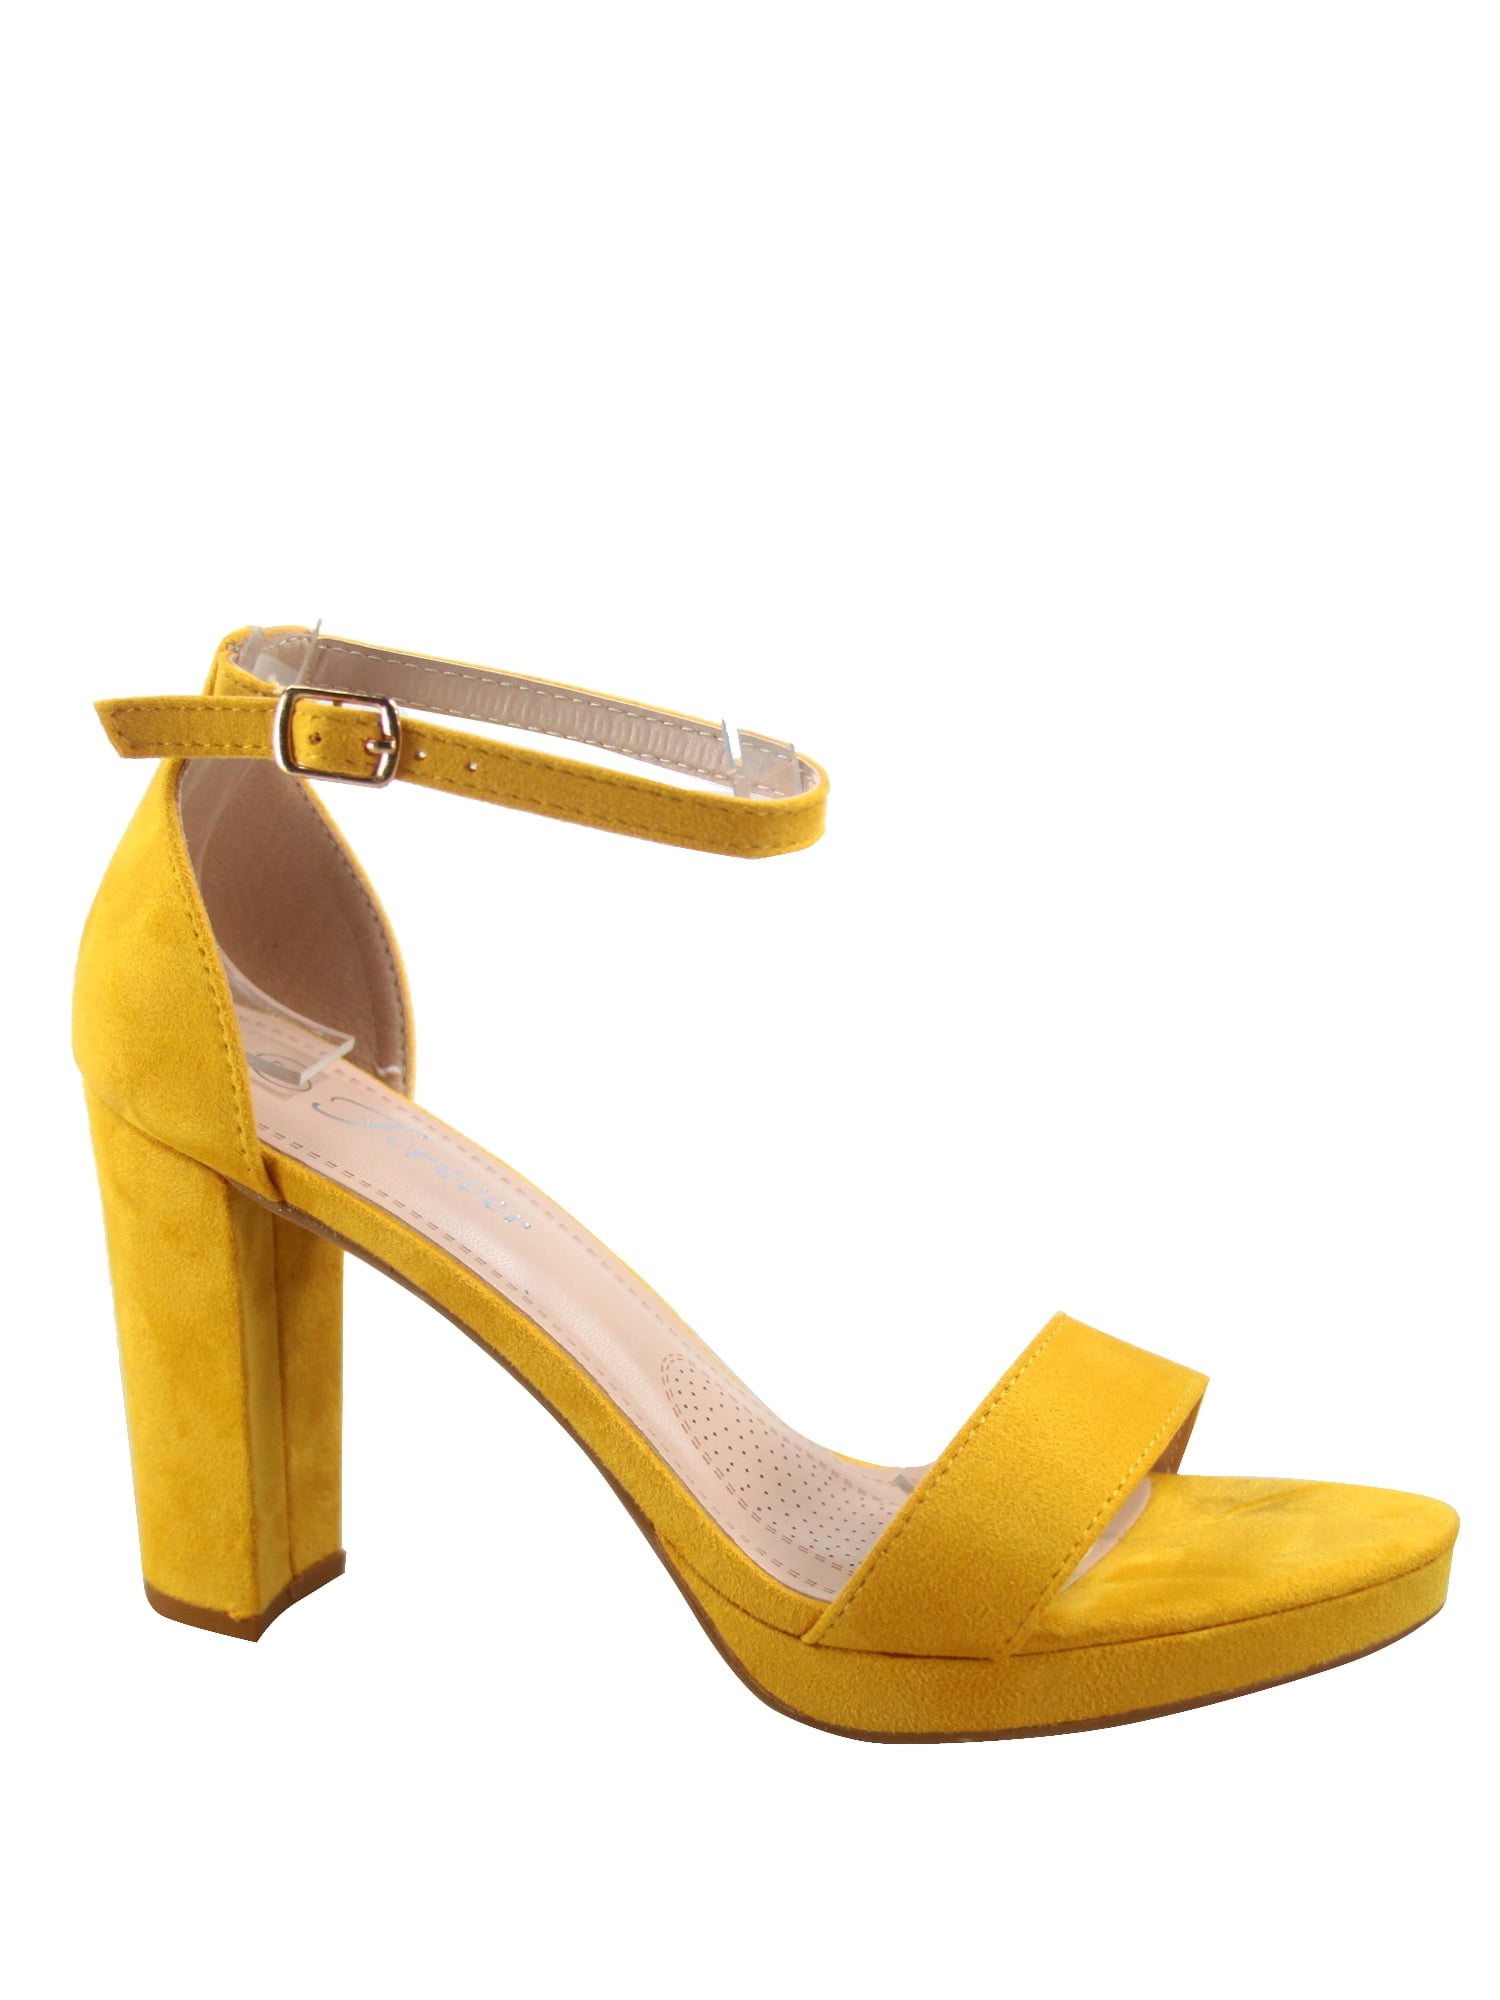 ASOS DESIGN Porto pointed high heeled court shoes in mustard | ASOS